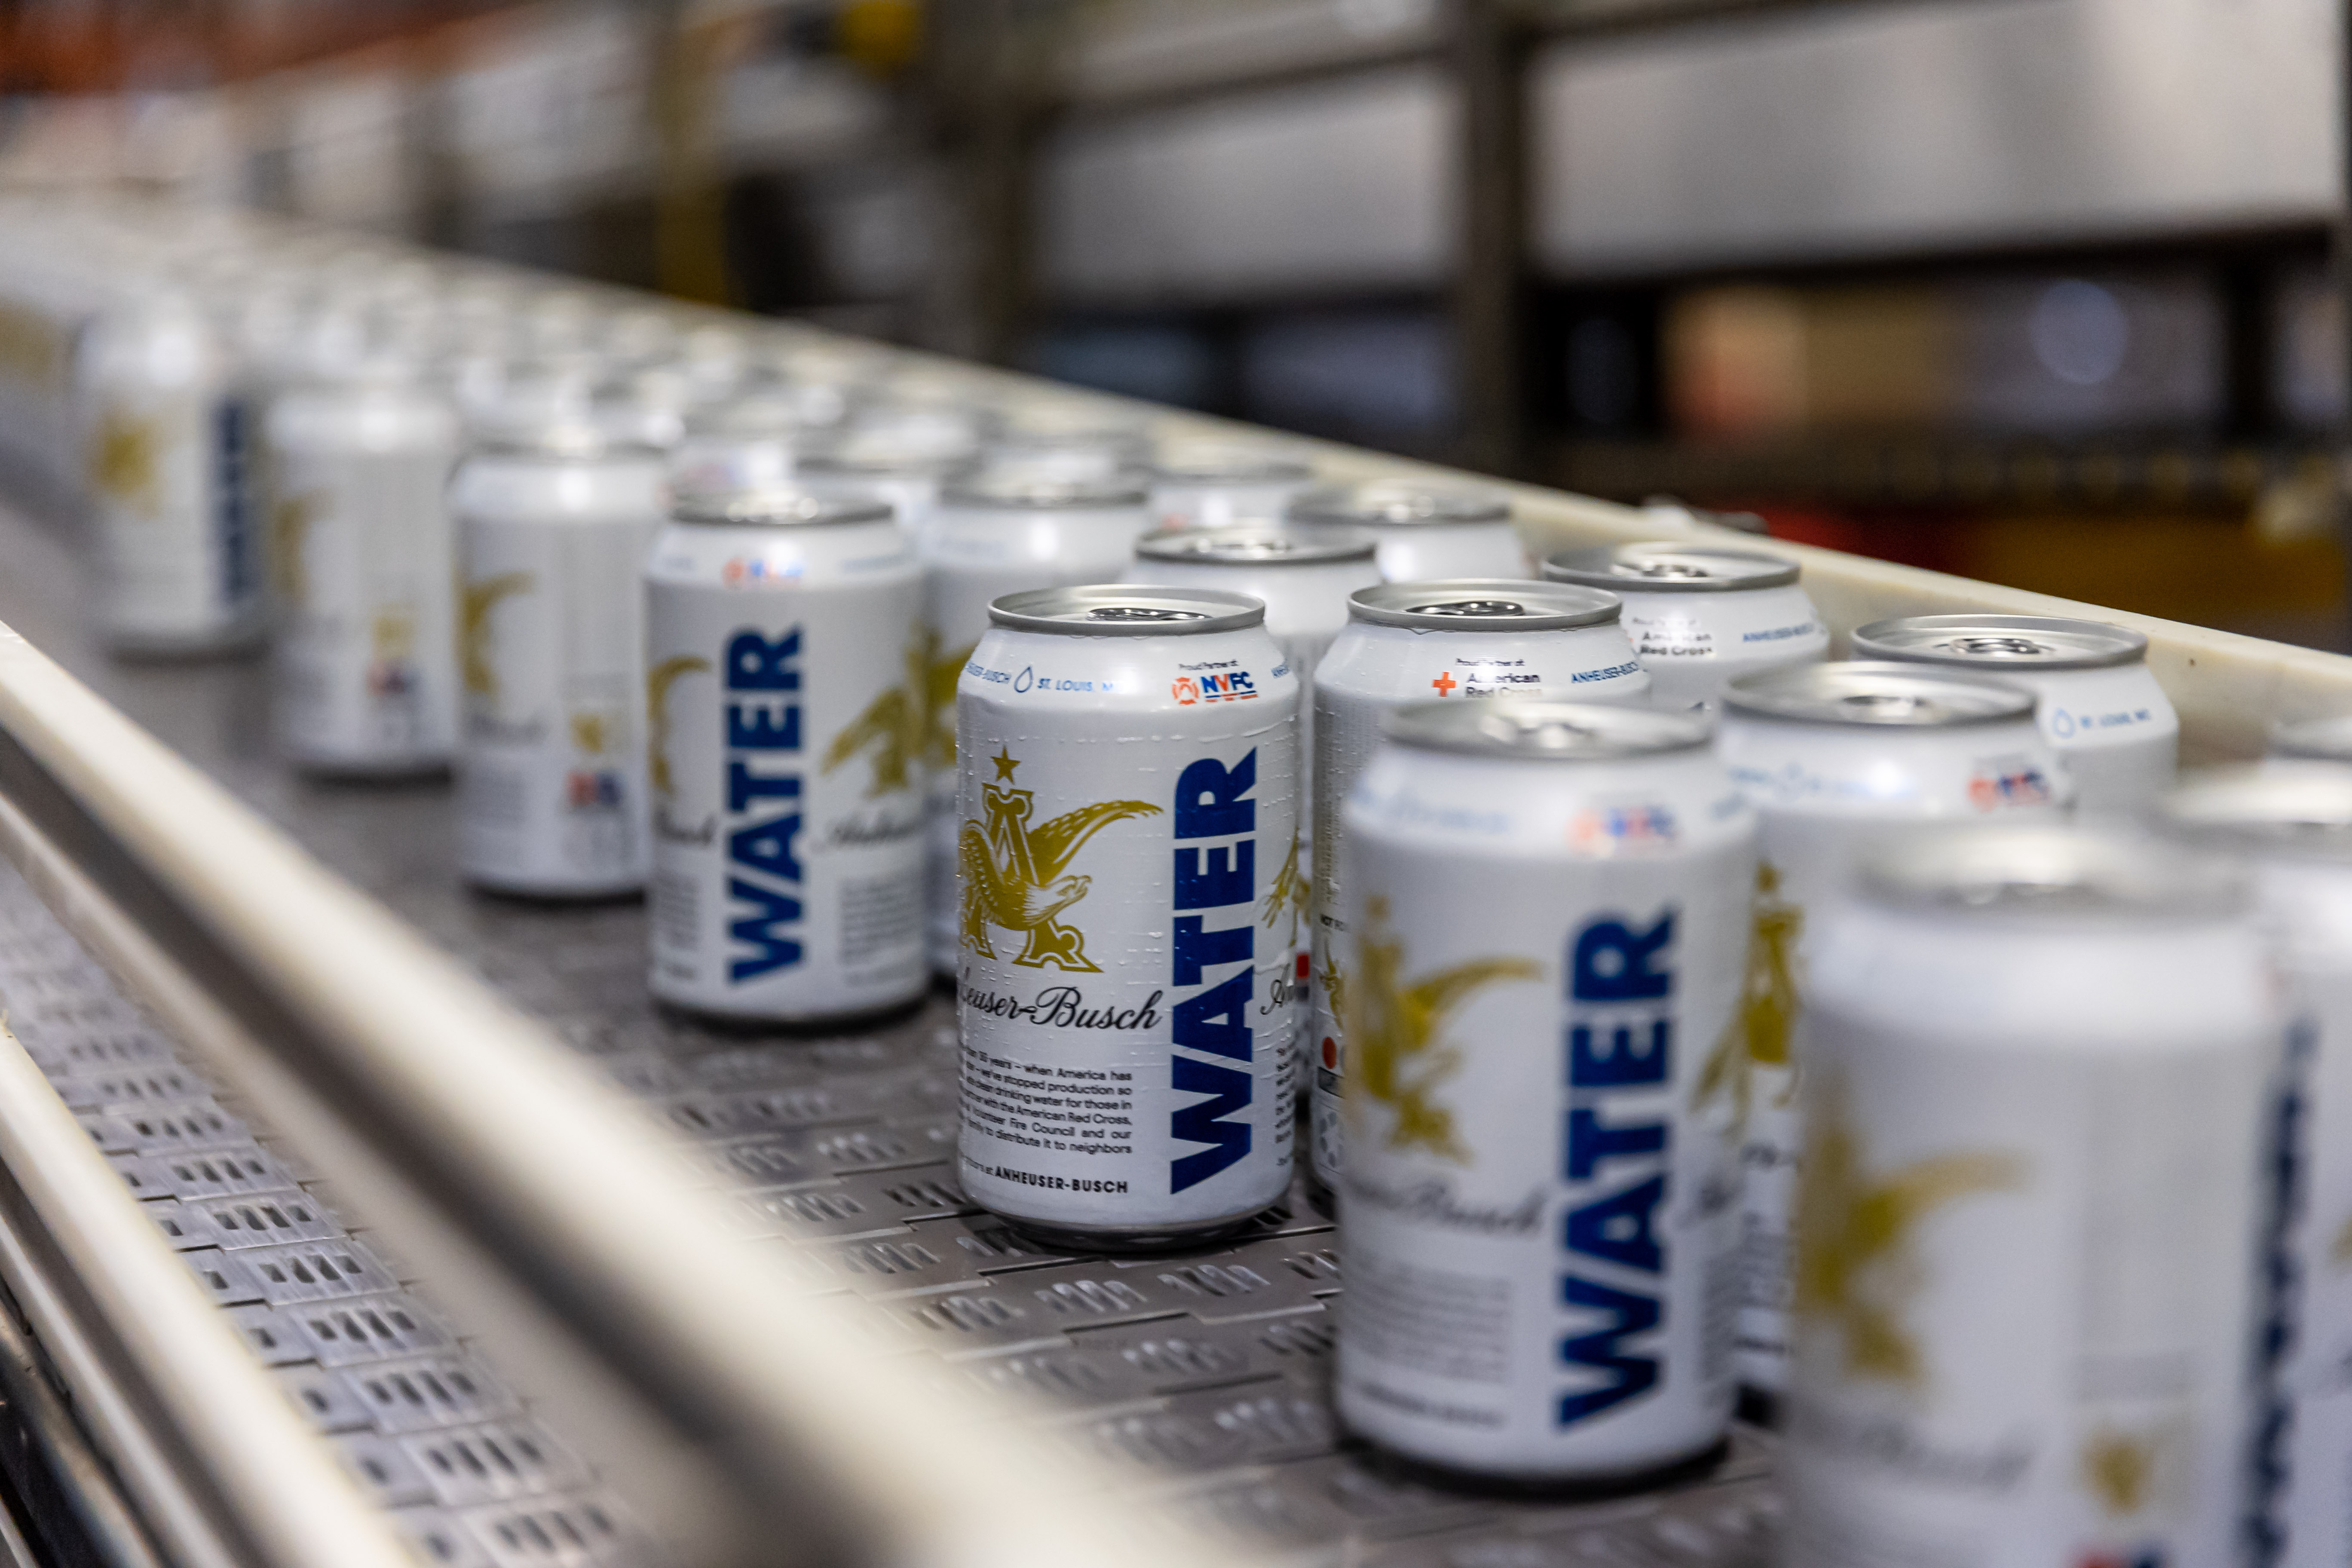 Anheuser-Busch Delivering One Million Cans of Emergency Drinking Water to Support Hurricane Relief Efforts in Florida